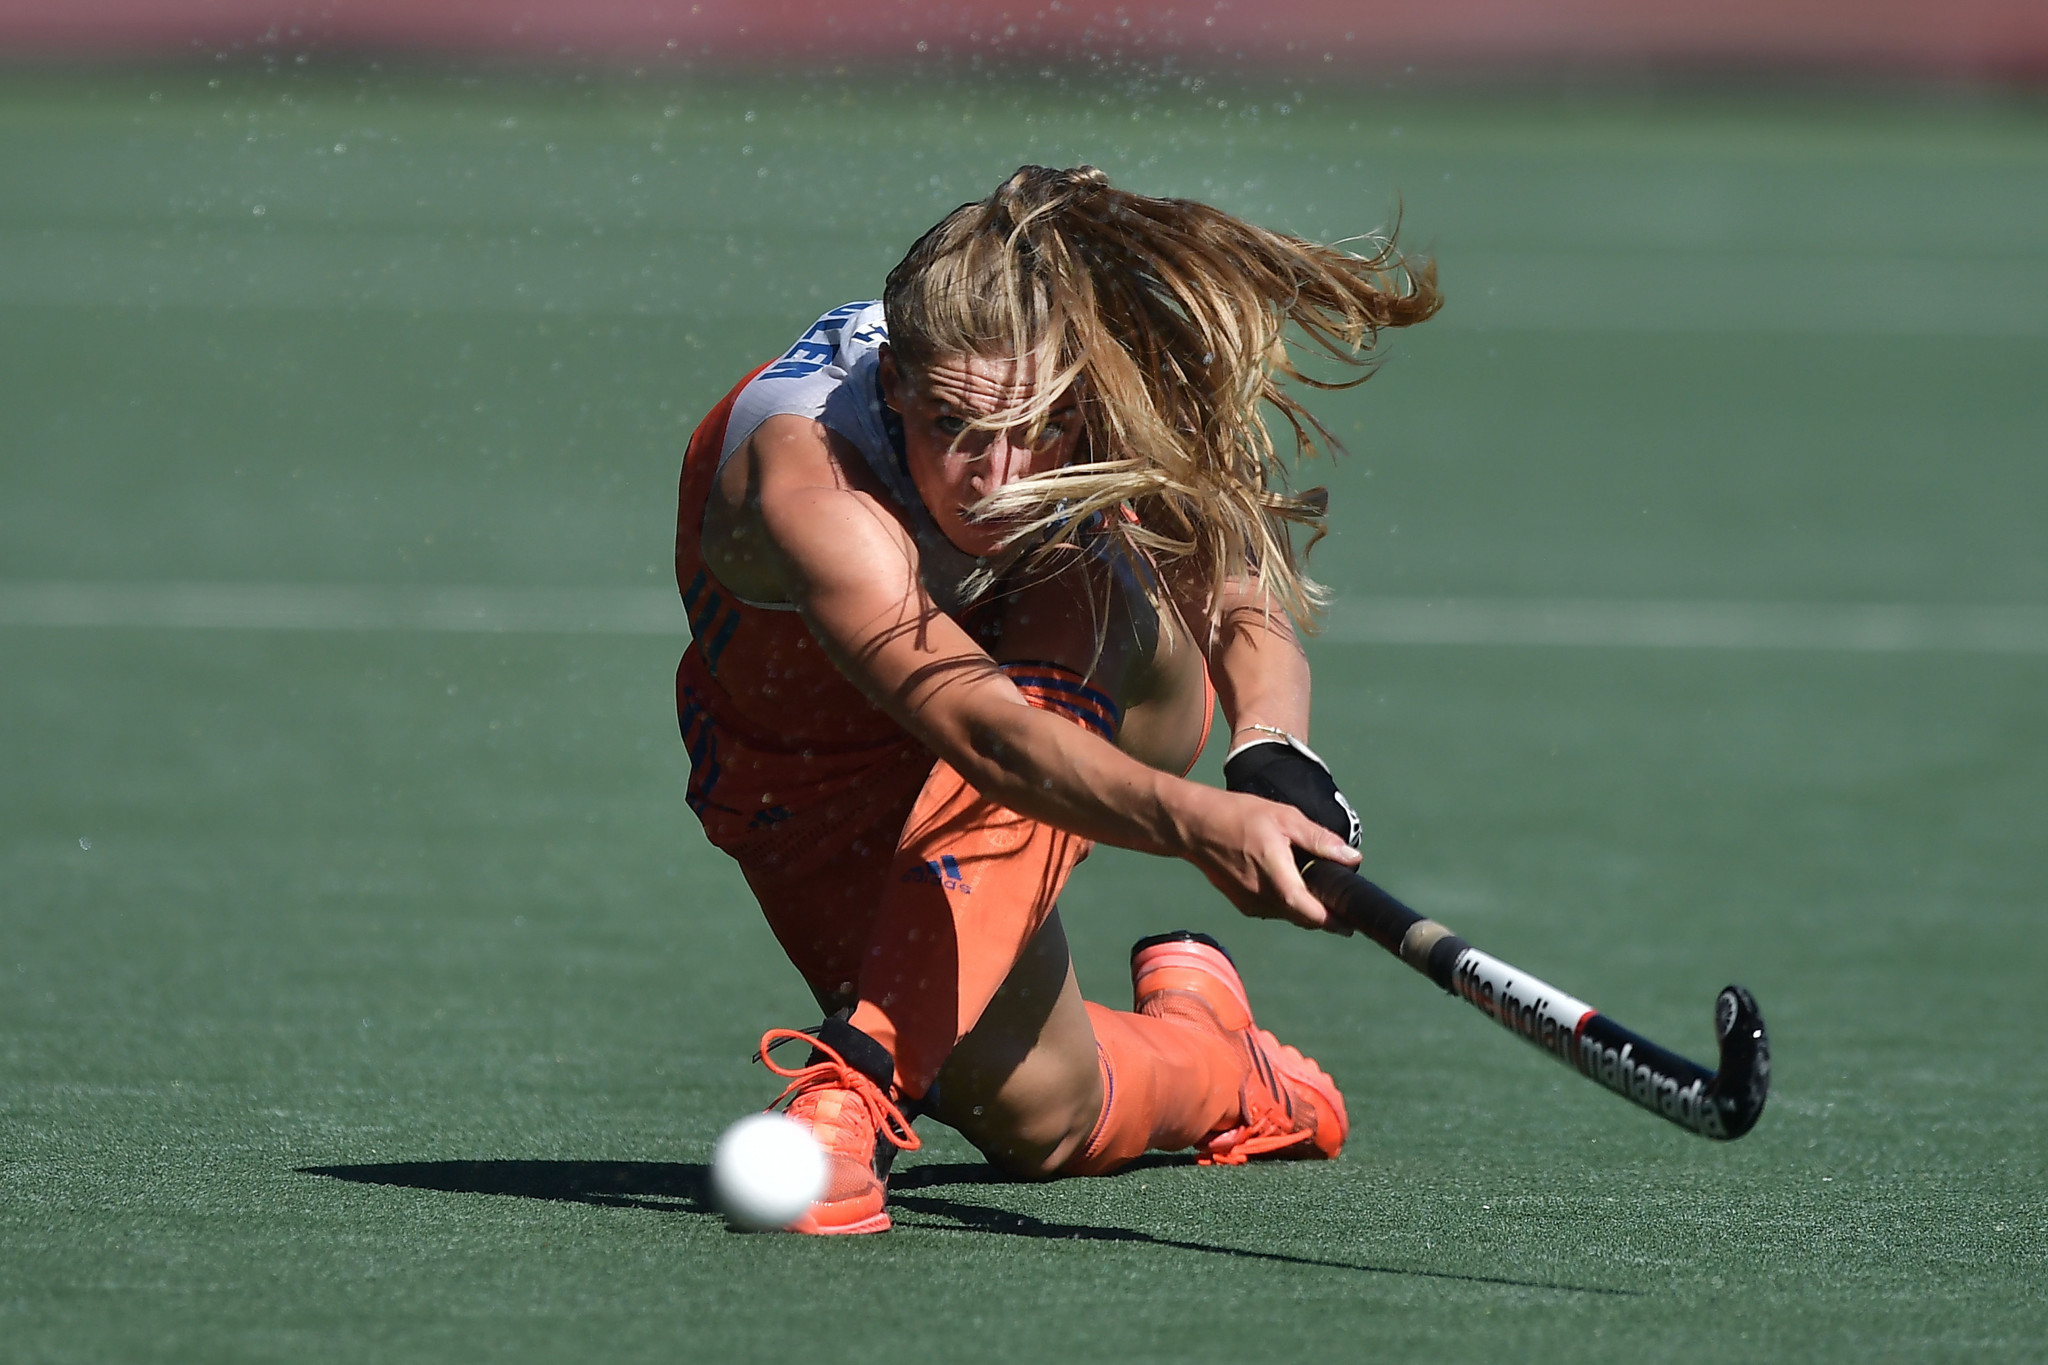 The Netherlands won their third game of the women's FIH Hockey Pro League ©Getty Images